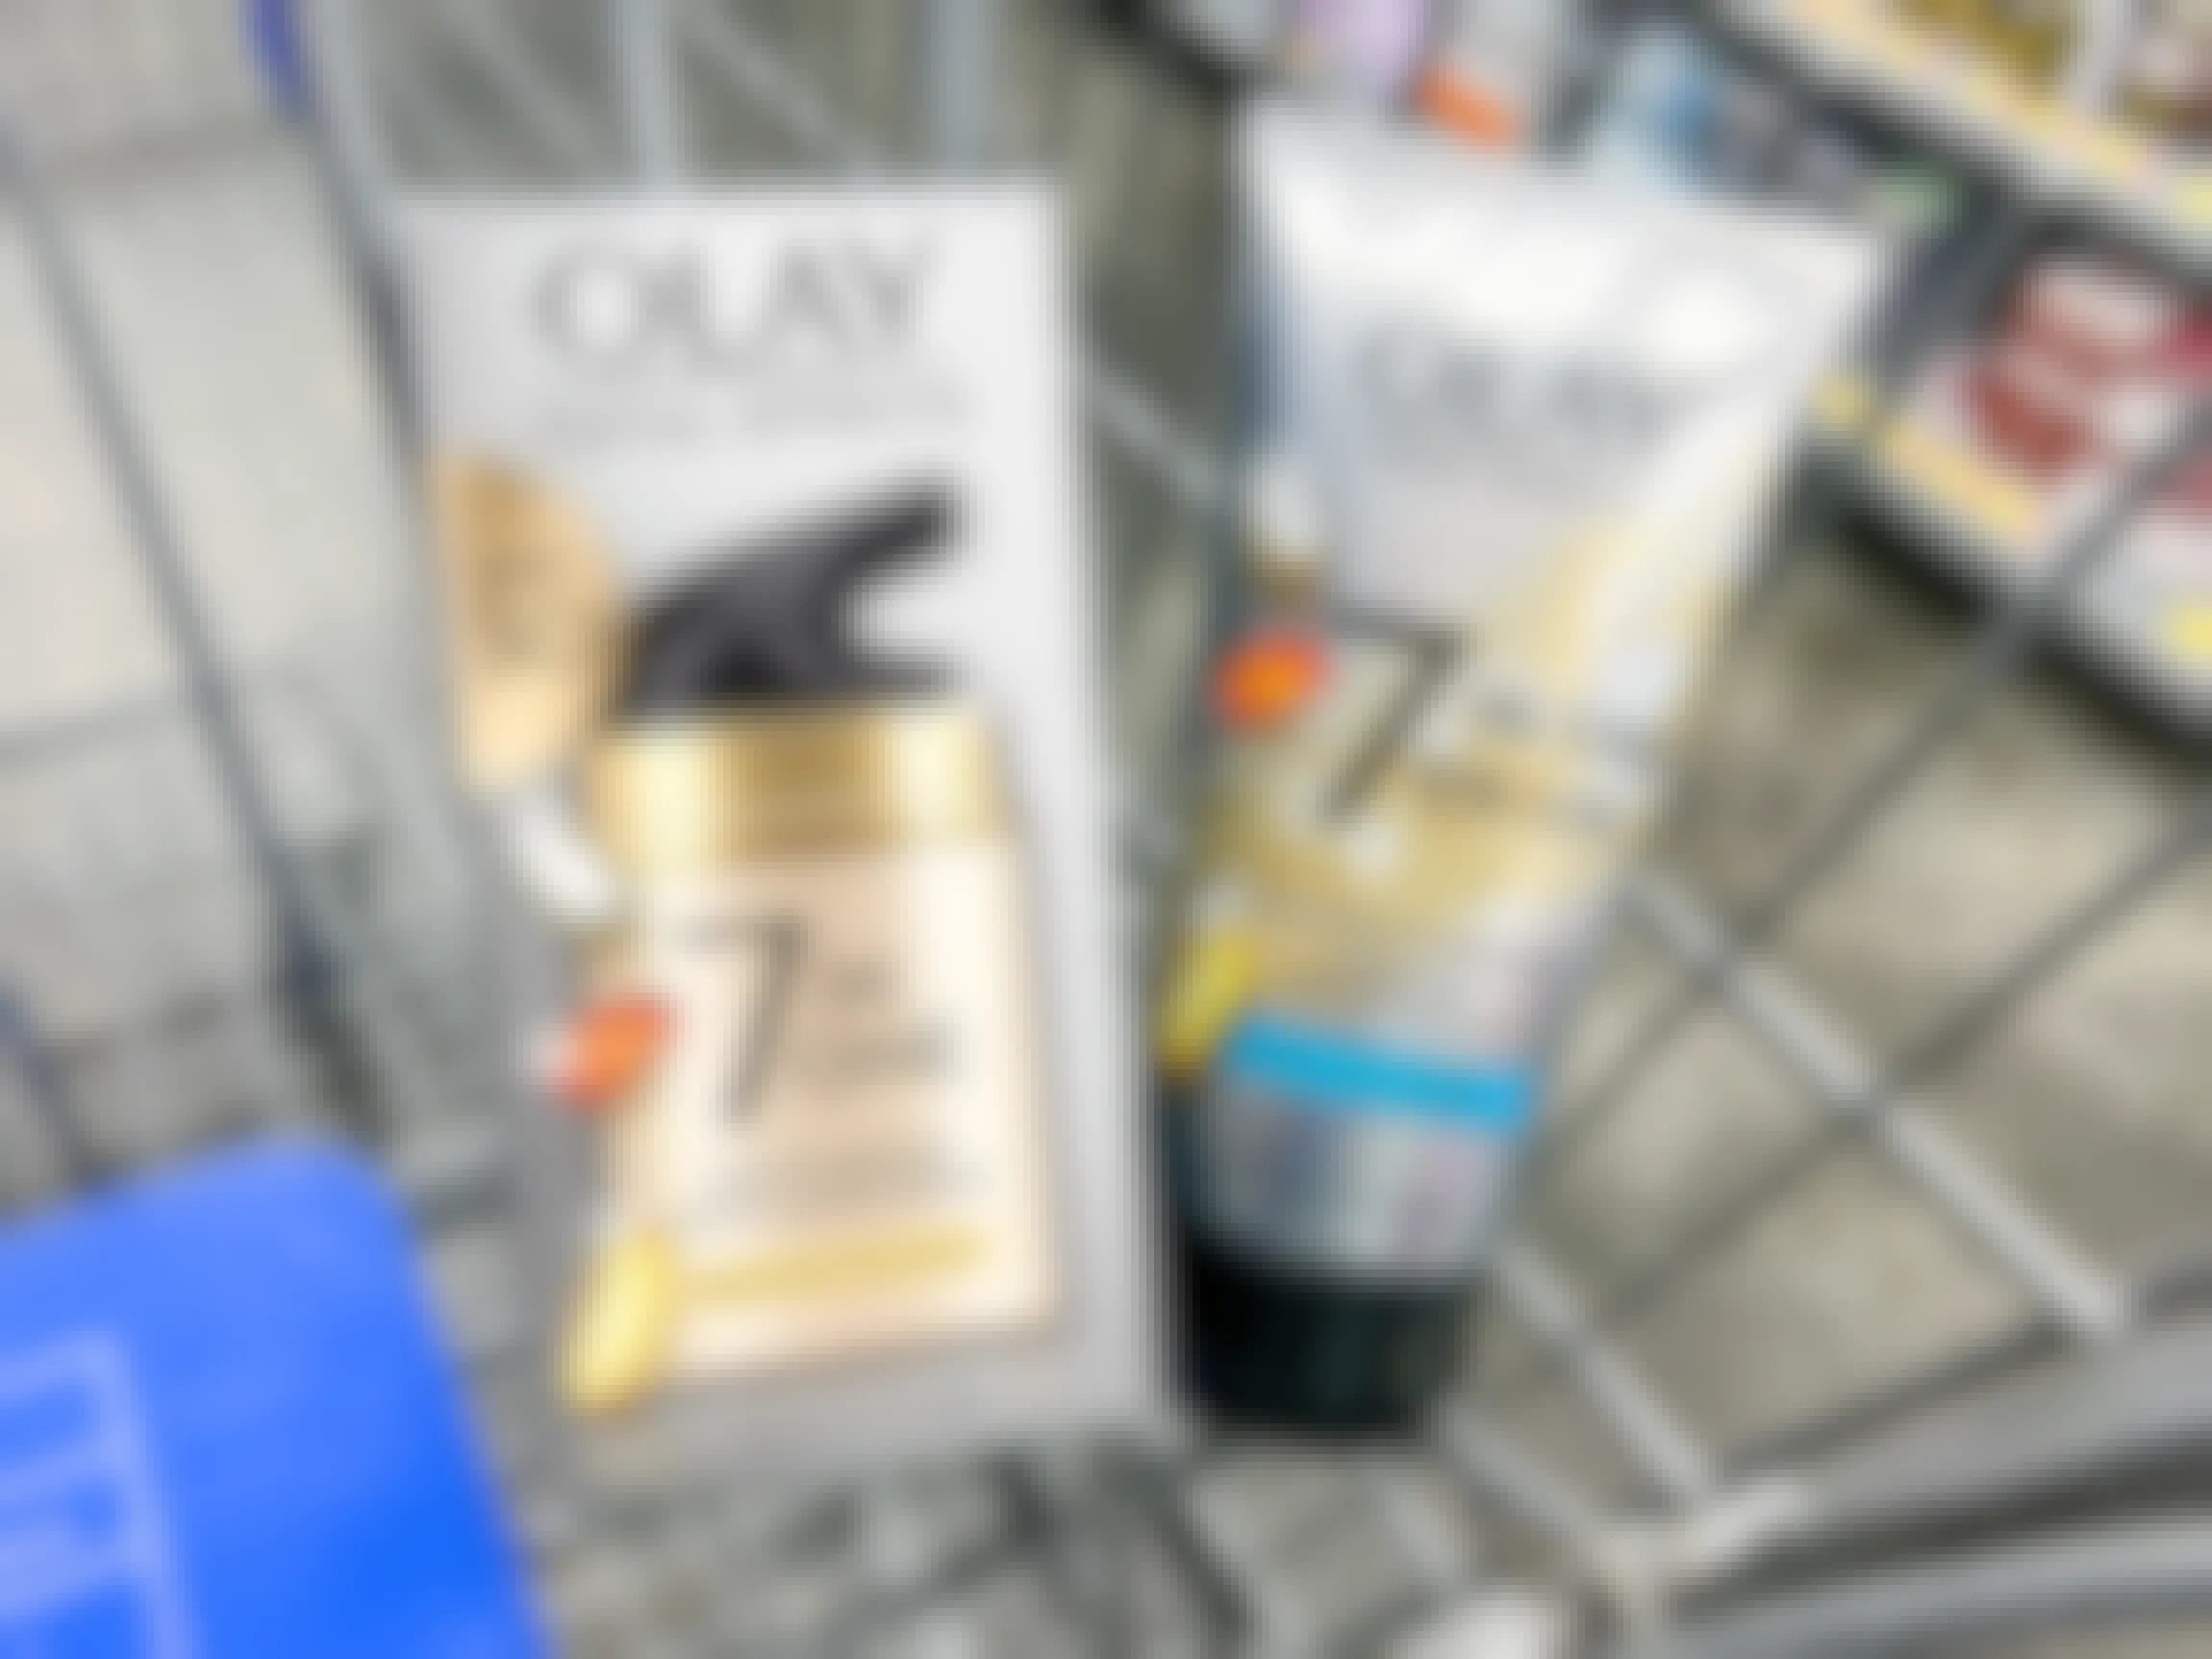 olay total effects 7-in-one moisturizer with sunscreen spf 30 and revitalizing foaming cleanser in walmart shopping cart